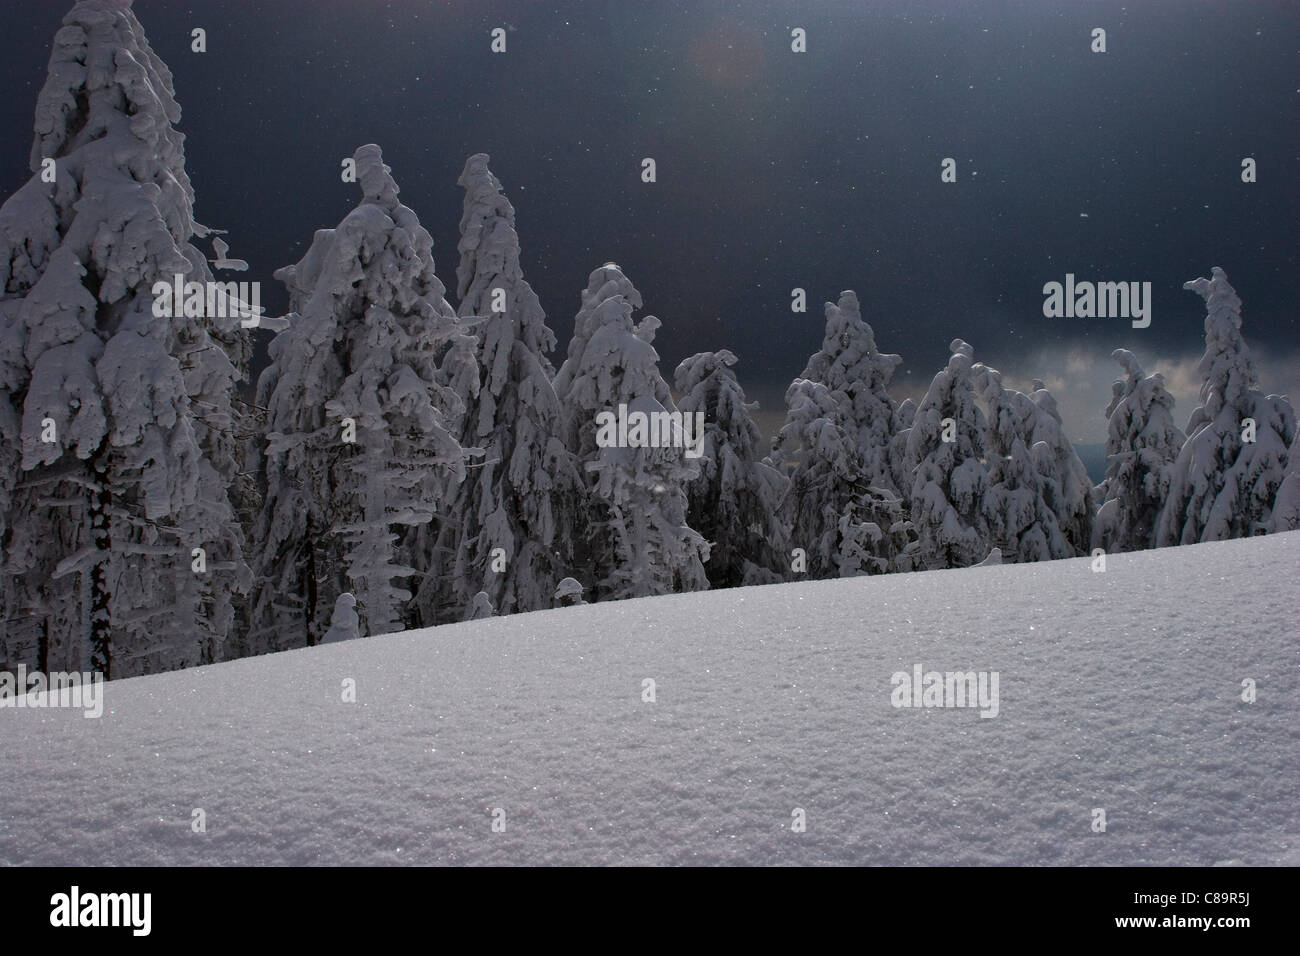 Germany, Harz, Fir forest in winter at night Stock Photo